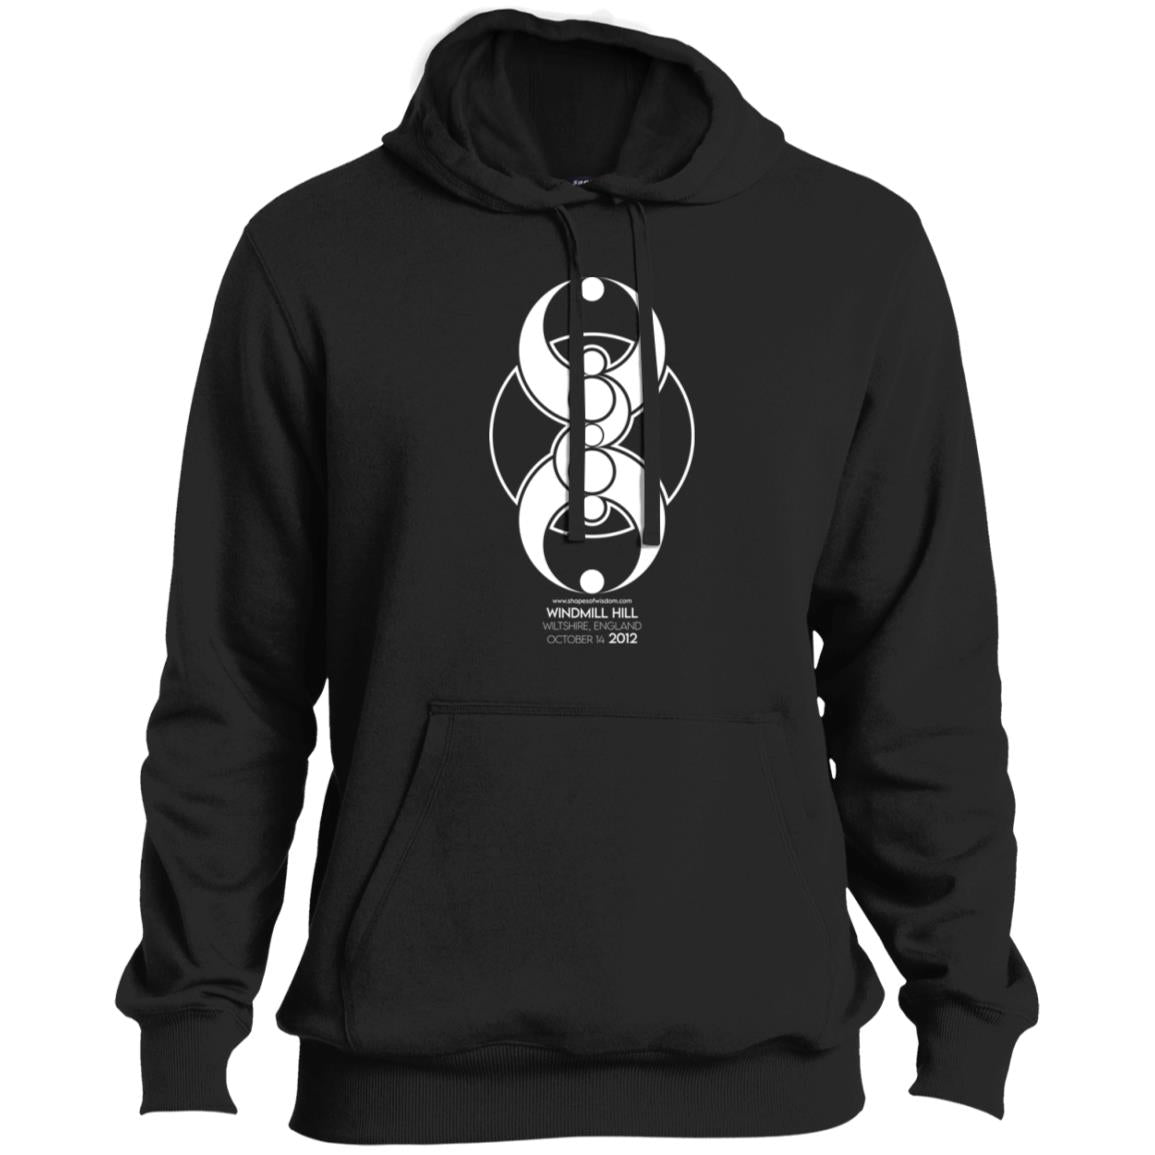 Crop Circle Pullover Hoodie - Windmill Hill 2